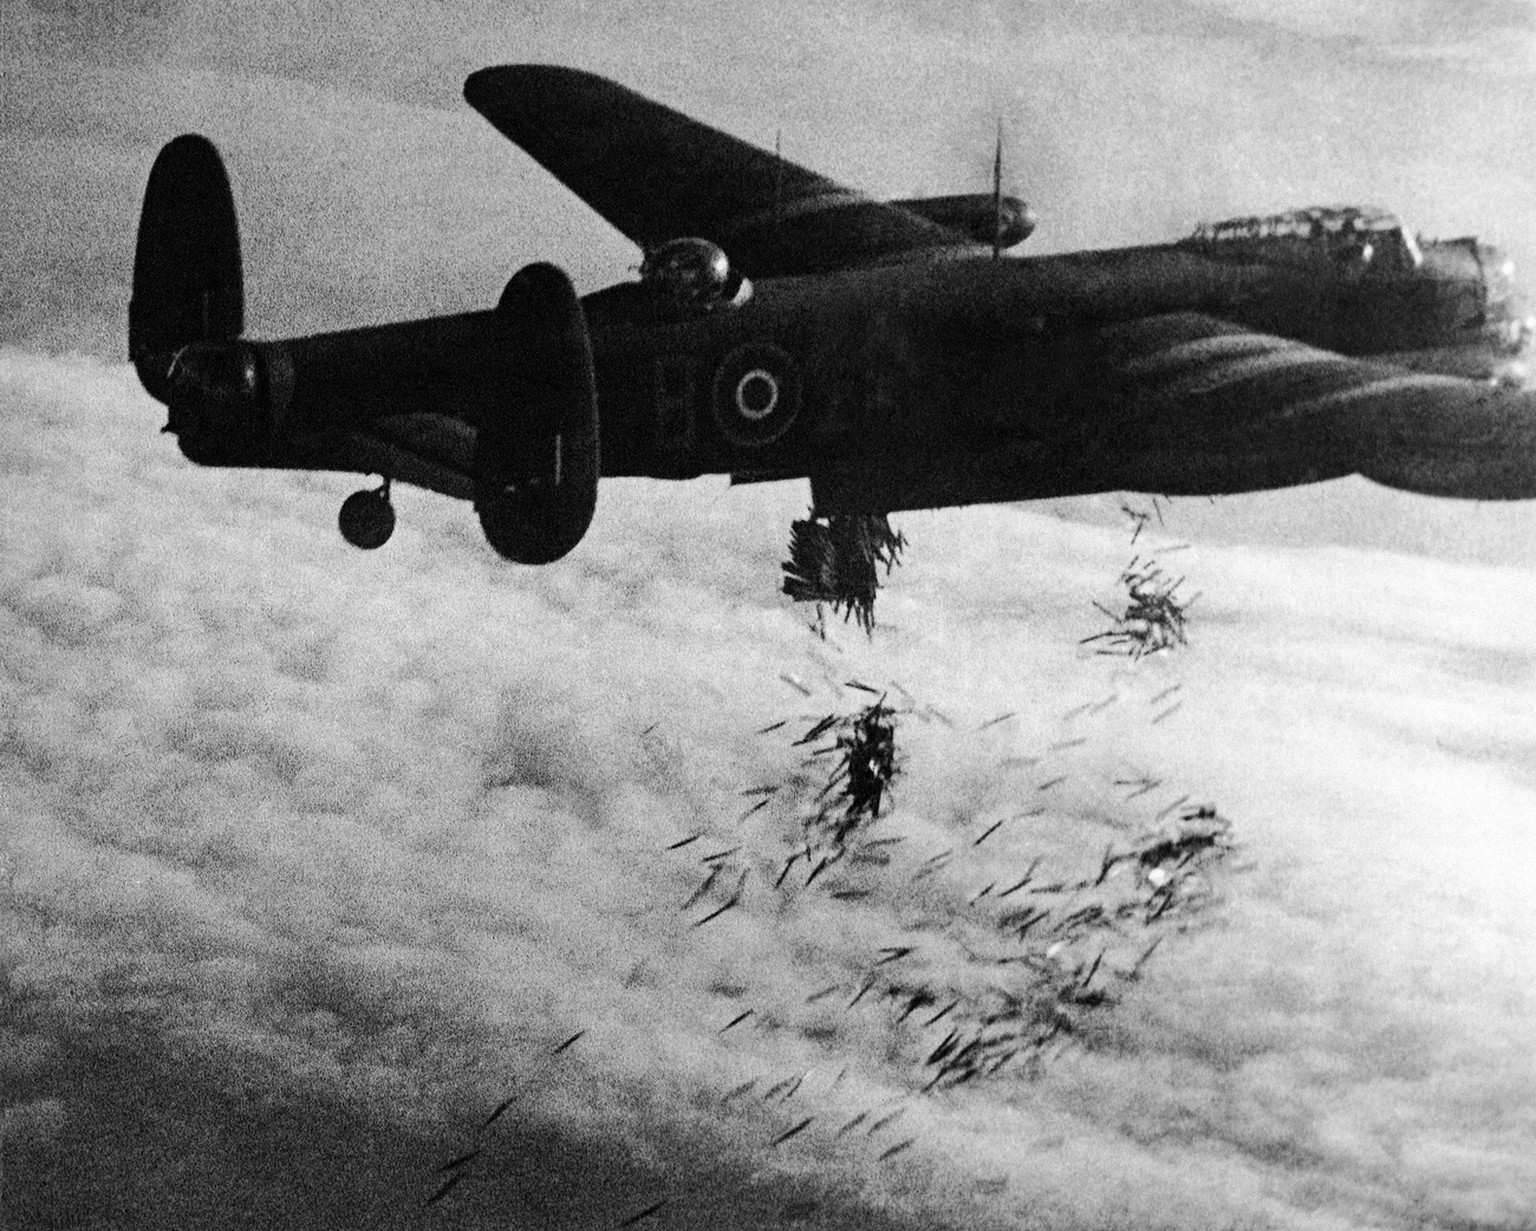 The great daylight attack on Duisburg by more than 1,000 Royal Air Force heavy bombers on Oct. 14, 1944. When over 4,500 tons of high explosive and incendiaries were dropped on the important Rhur comm ...